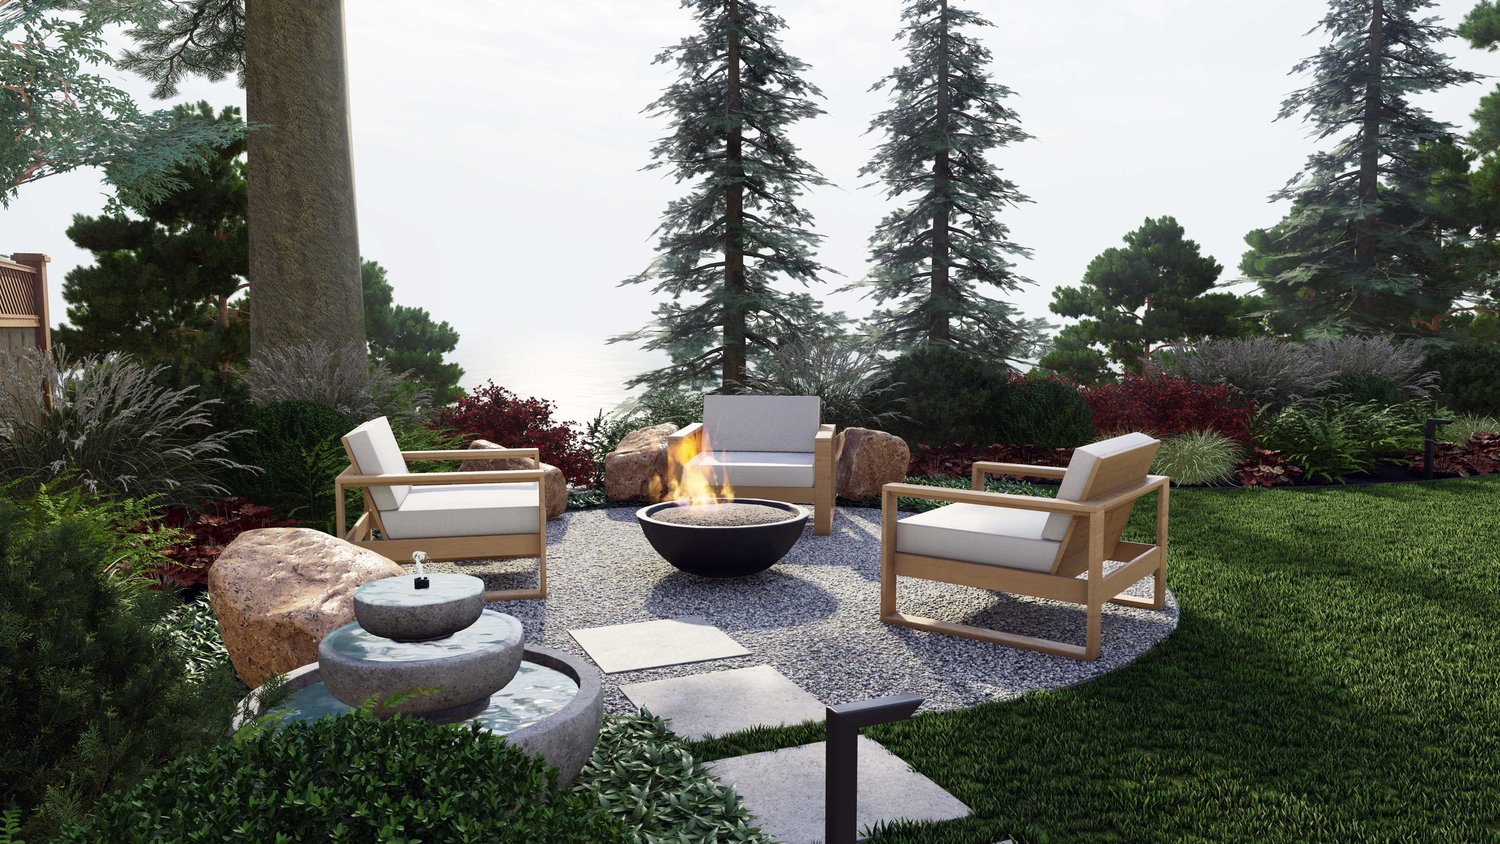 Twin Falls gravel patio with fire pit and chairs, paver pathway, lawn, trees, plants, boulder stone, and water feature